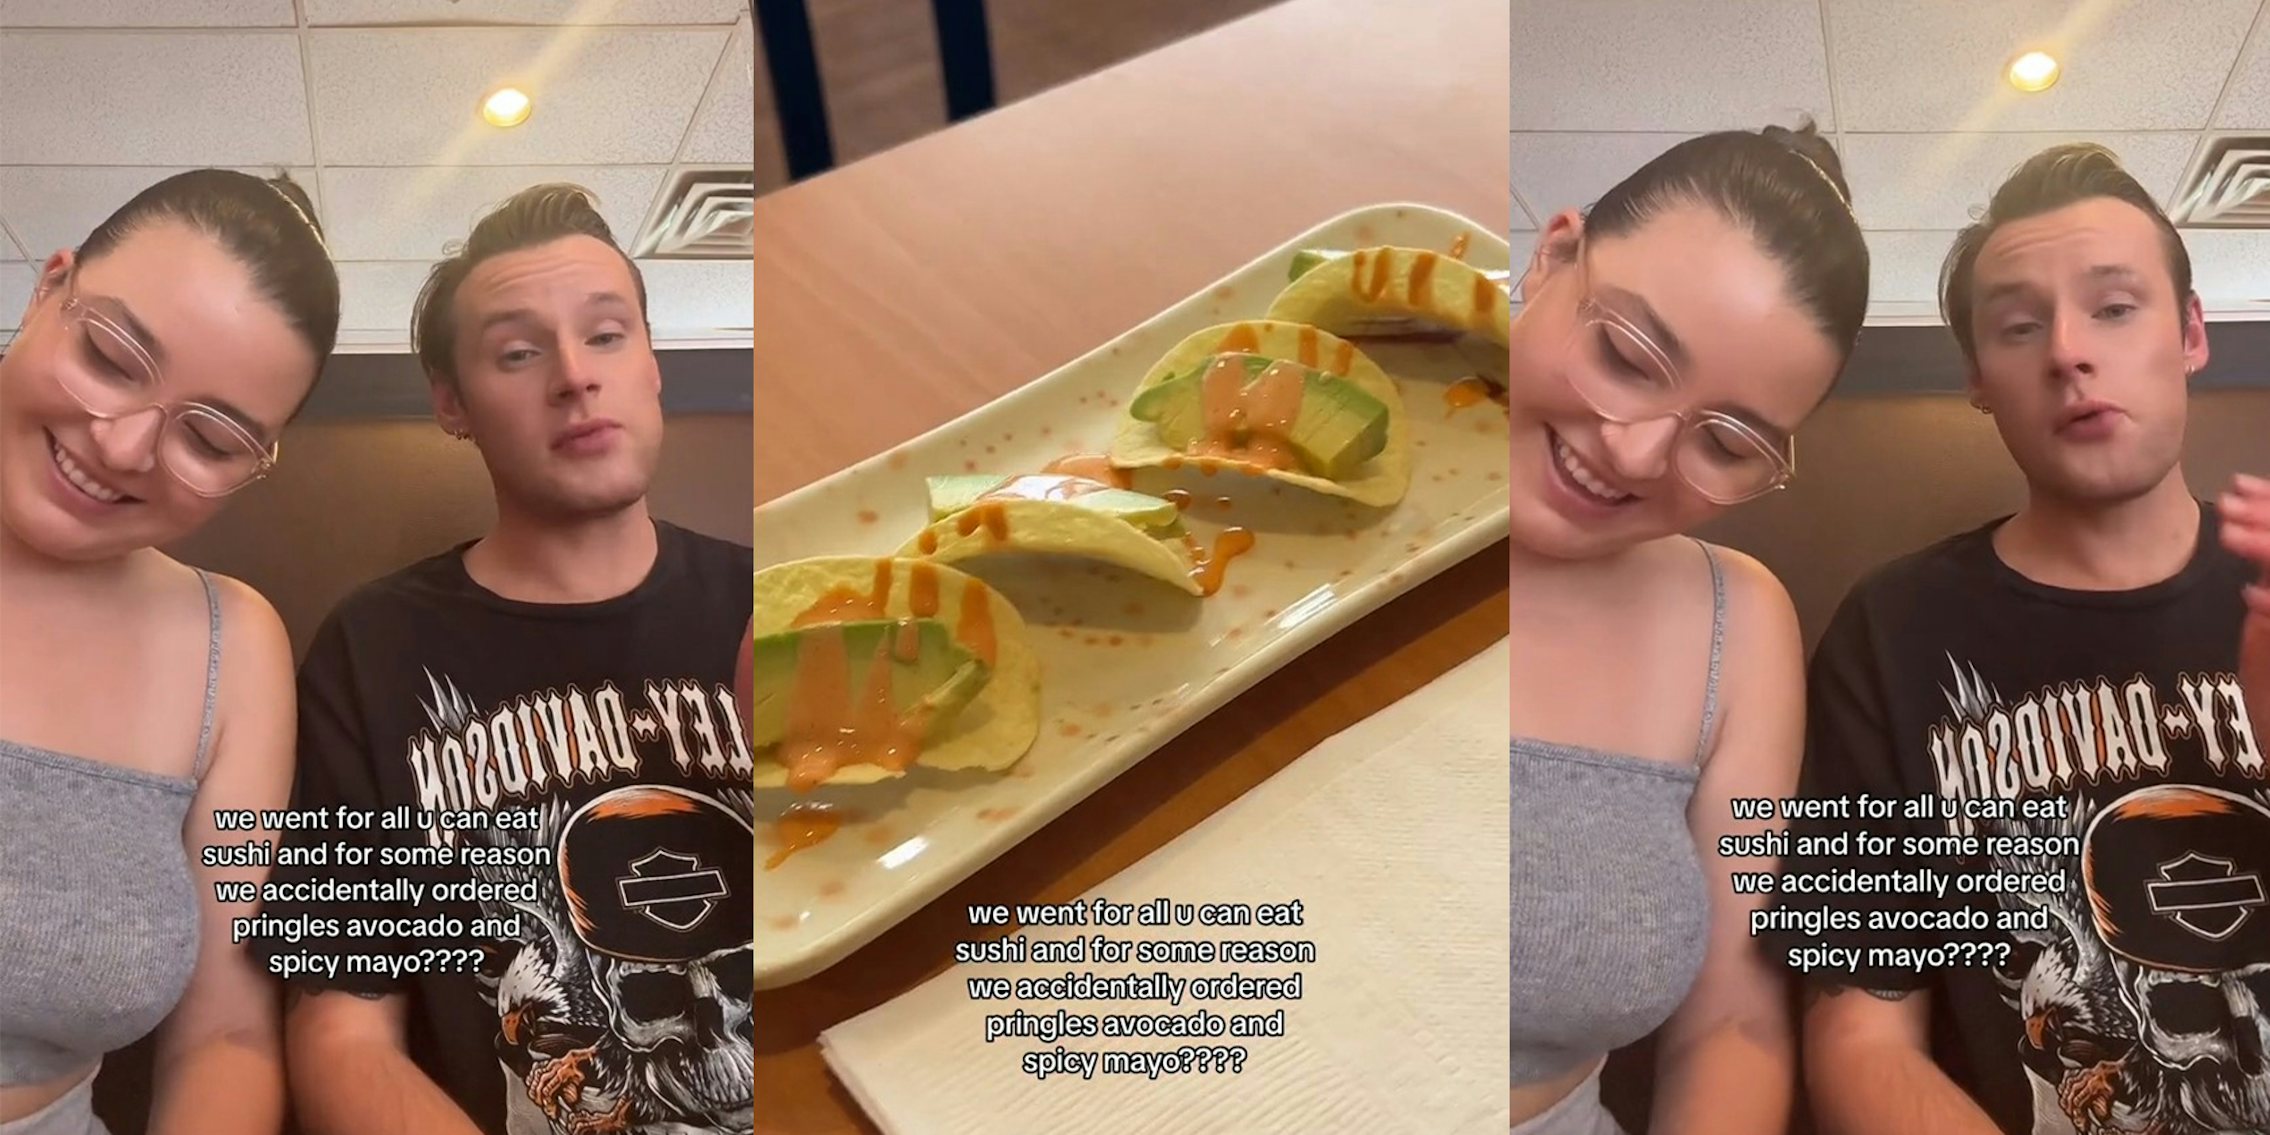 Customers go to all-you-can-eat sushi, they get served 'Pringles' with avocado and spicy mayo